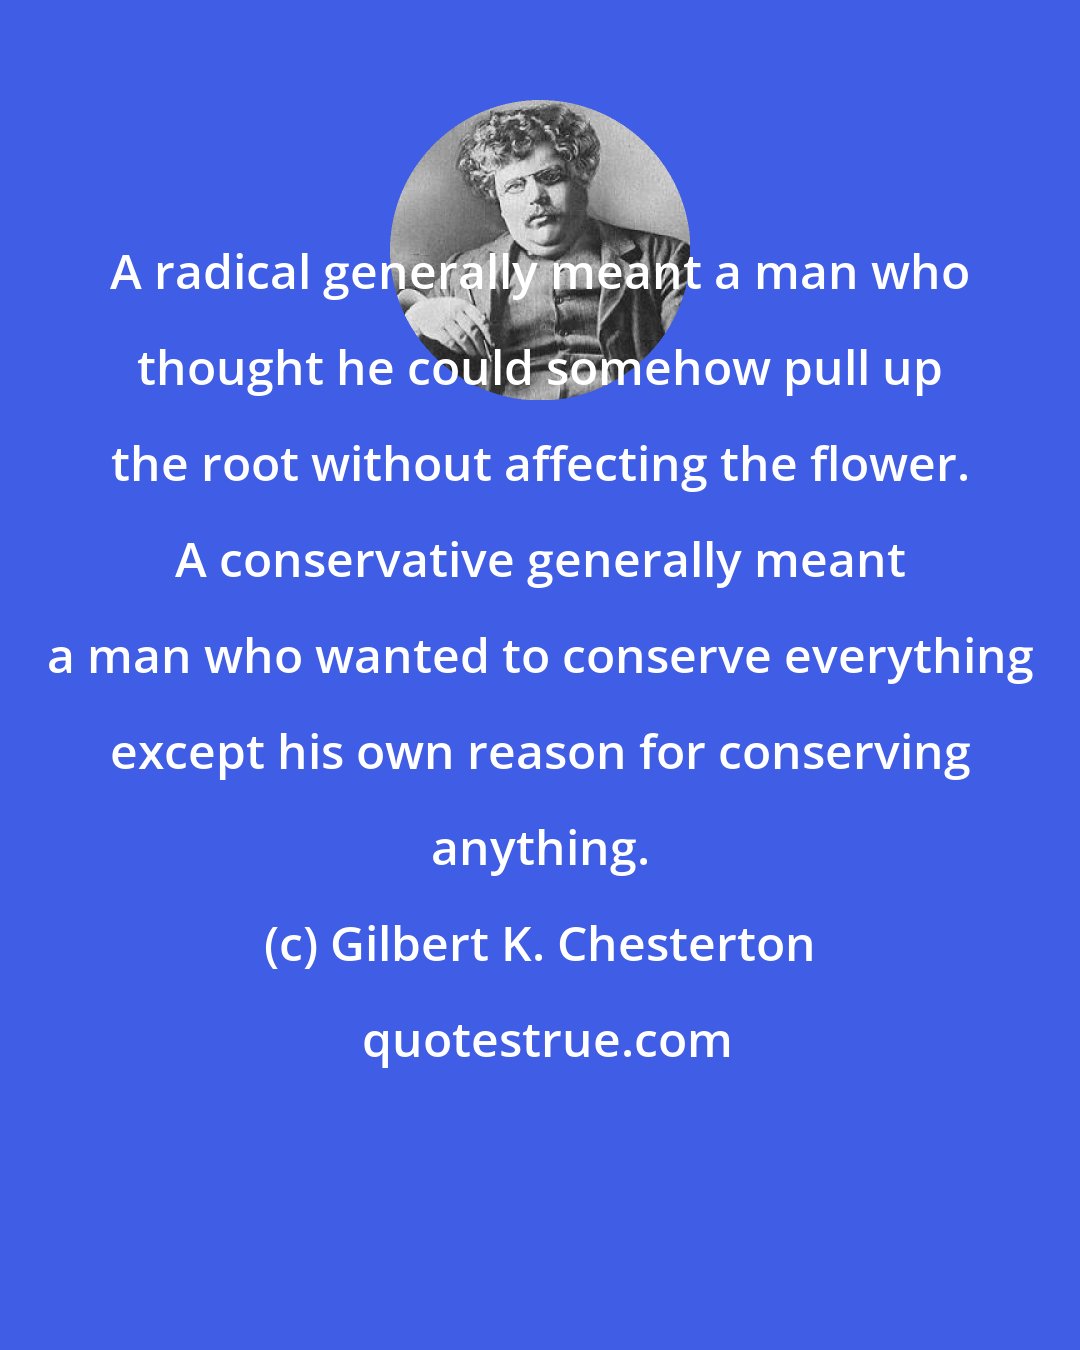 Gilbert K. Chesterton: A radical generally meant a man who thought he could somehow pull up the root without affecting the flower. A conservative generally meant a man who wanted to conserve everything except his own reason for conserving anything.